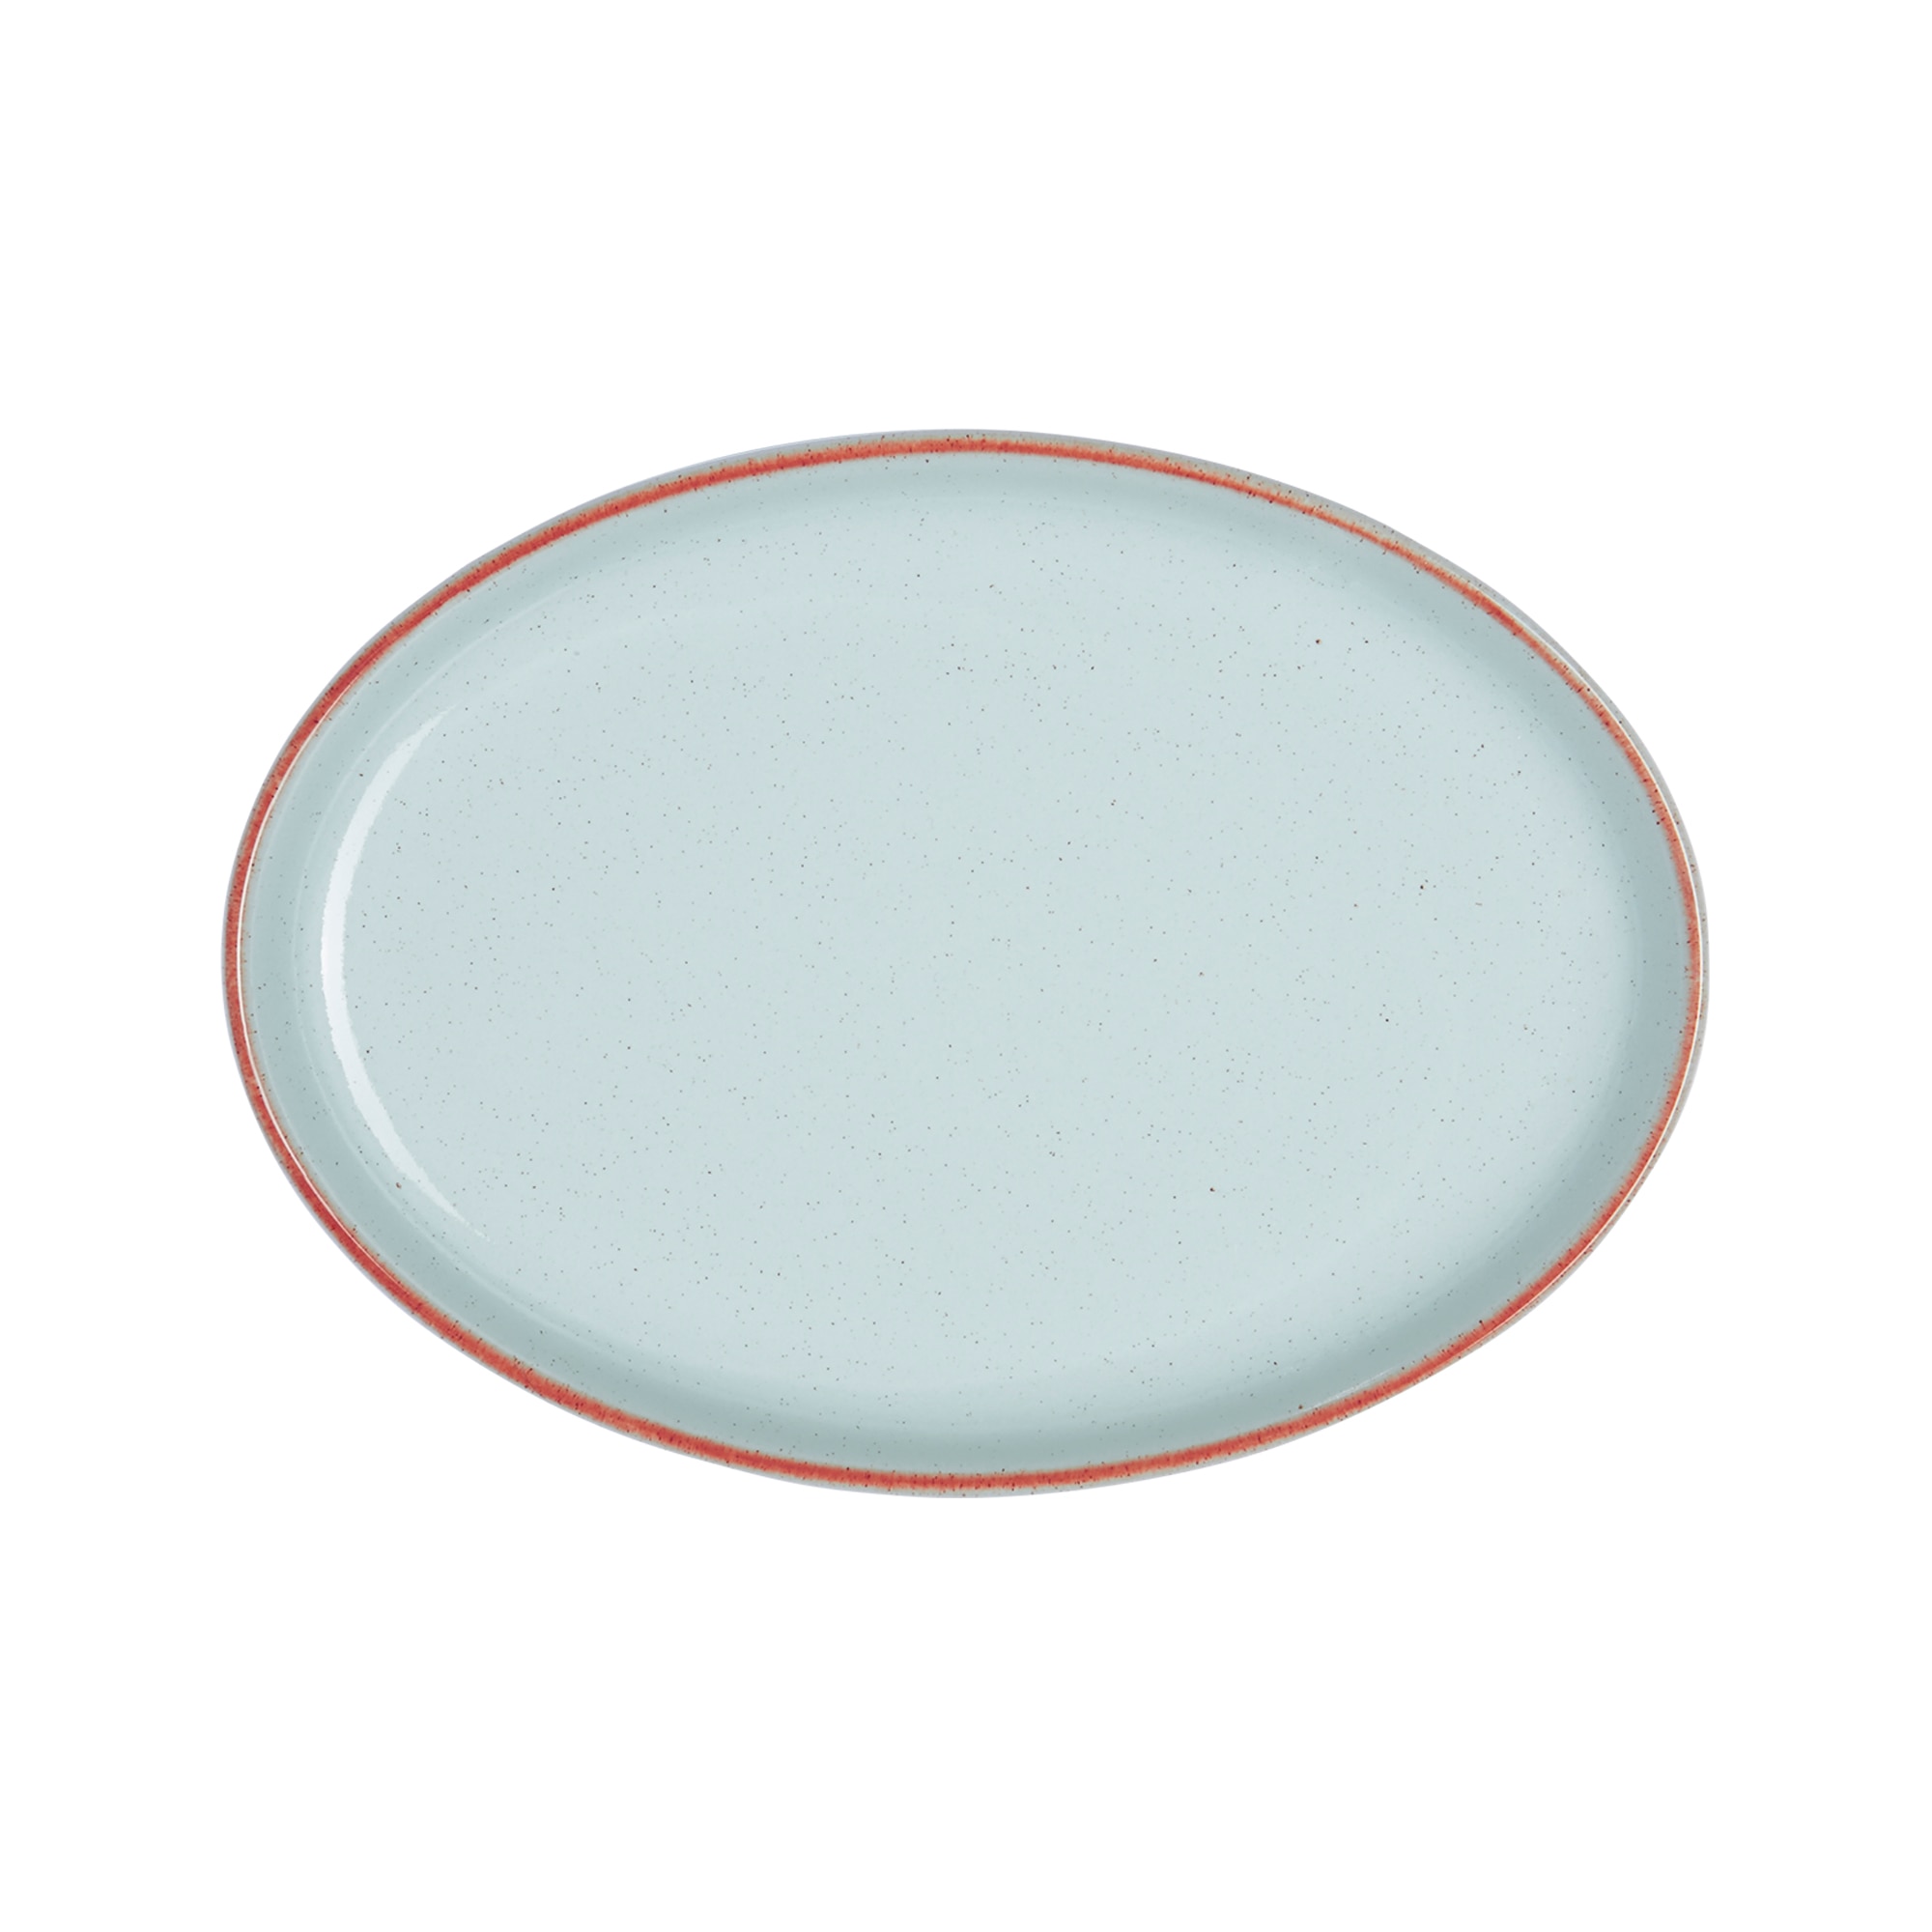 Heritage Pavilion Small Oval Tray